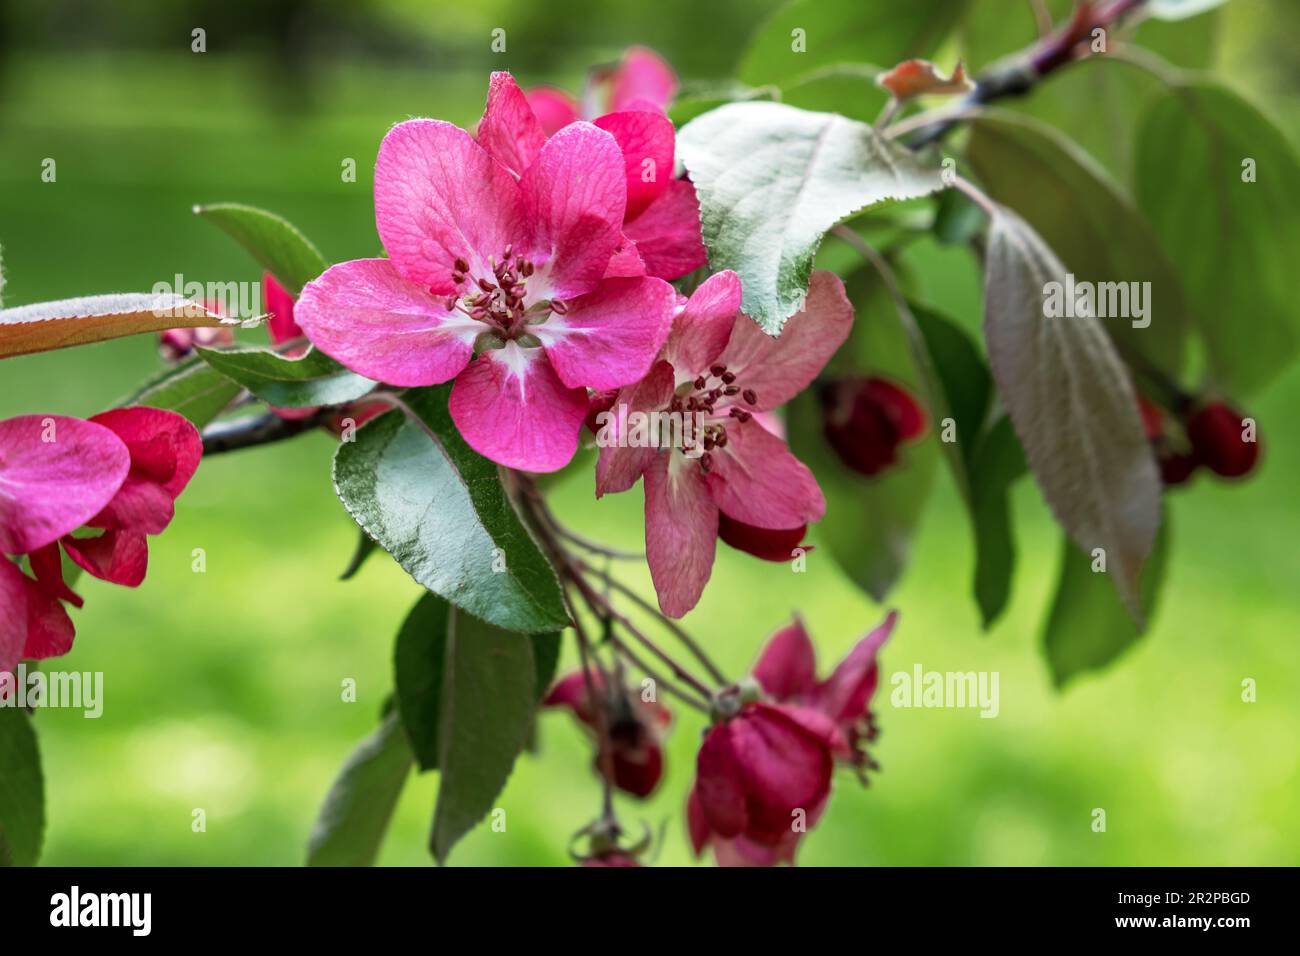 Pink apple tree flowers on a branch in spring. Stock Photo